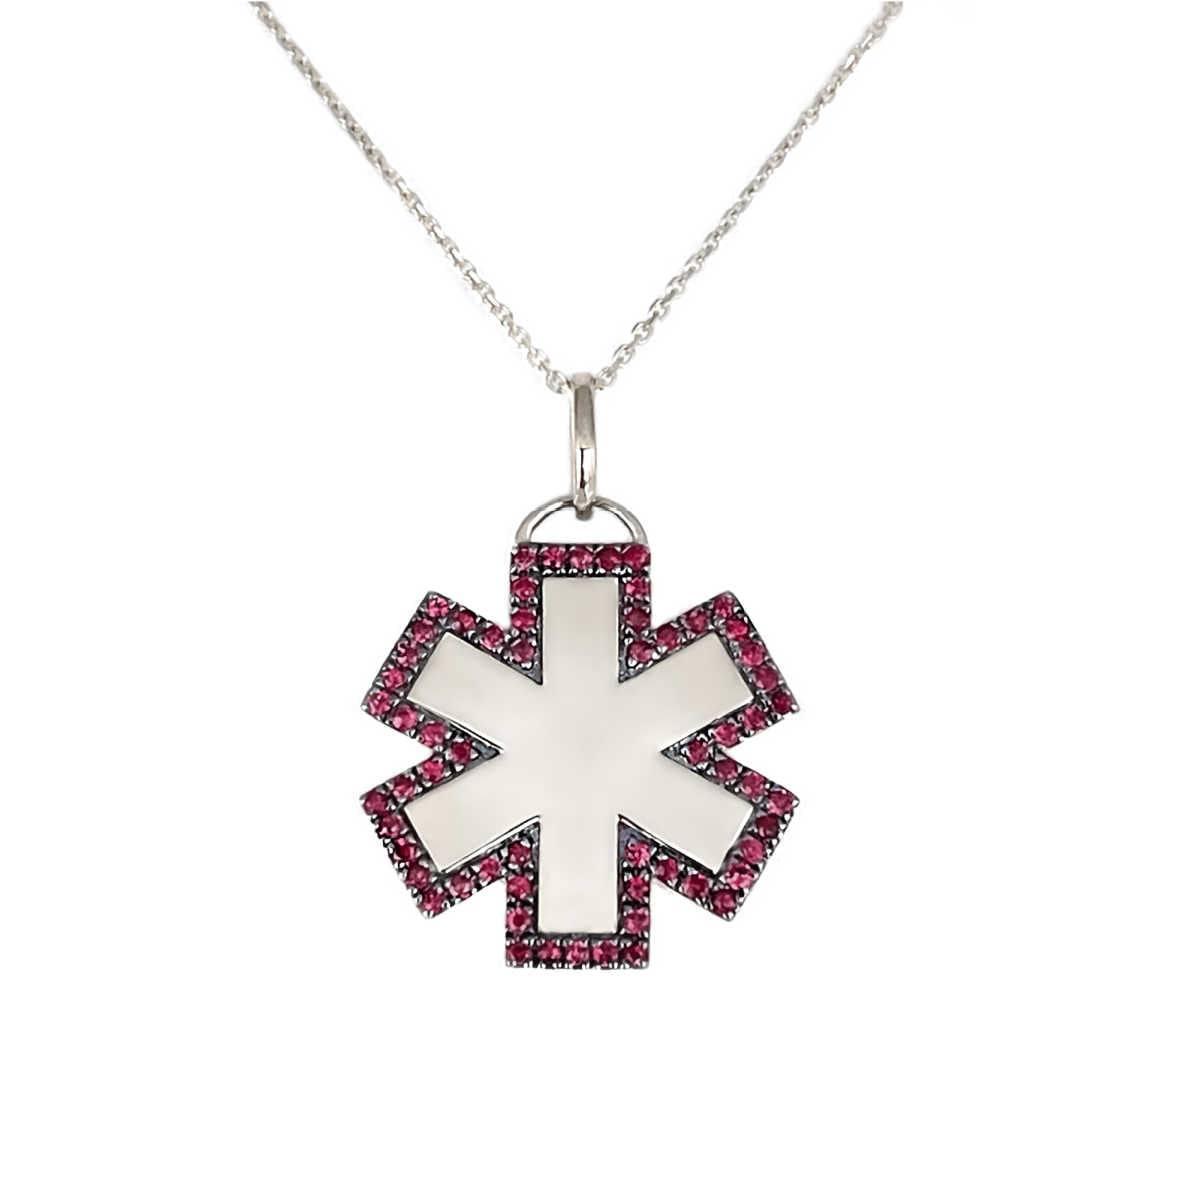 White Gold Medical Alert Necklace | Star of Life Pendant with Ruby | Engraved Medical IDs for Women | Charmed Medical Jewelry